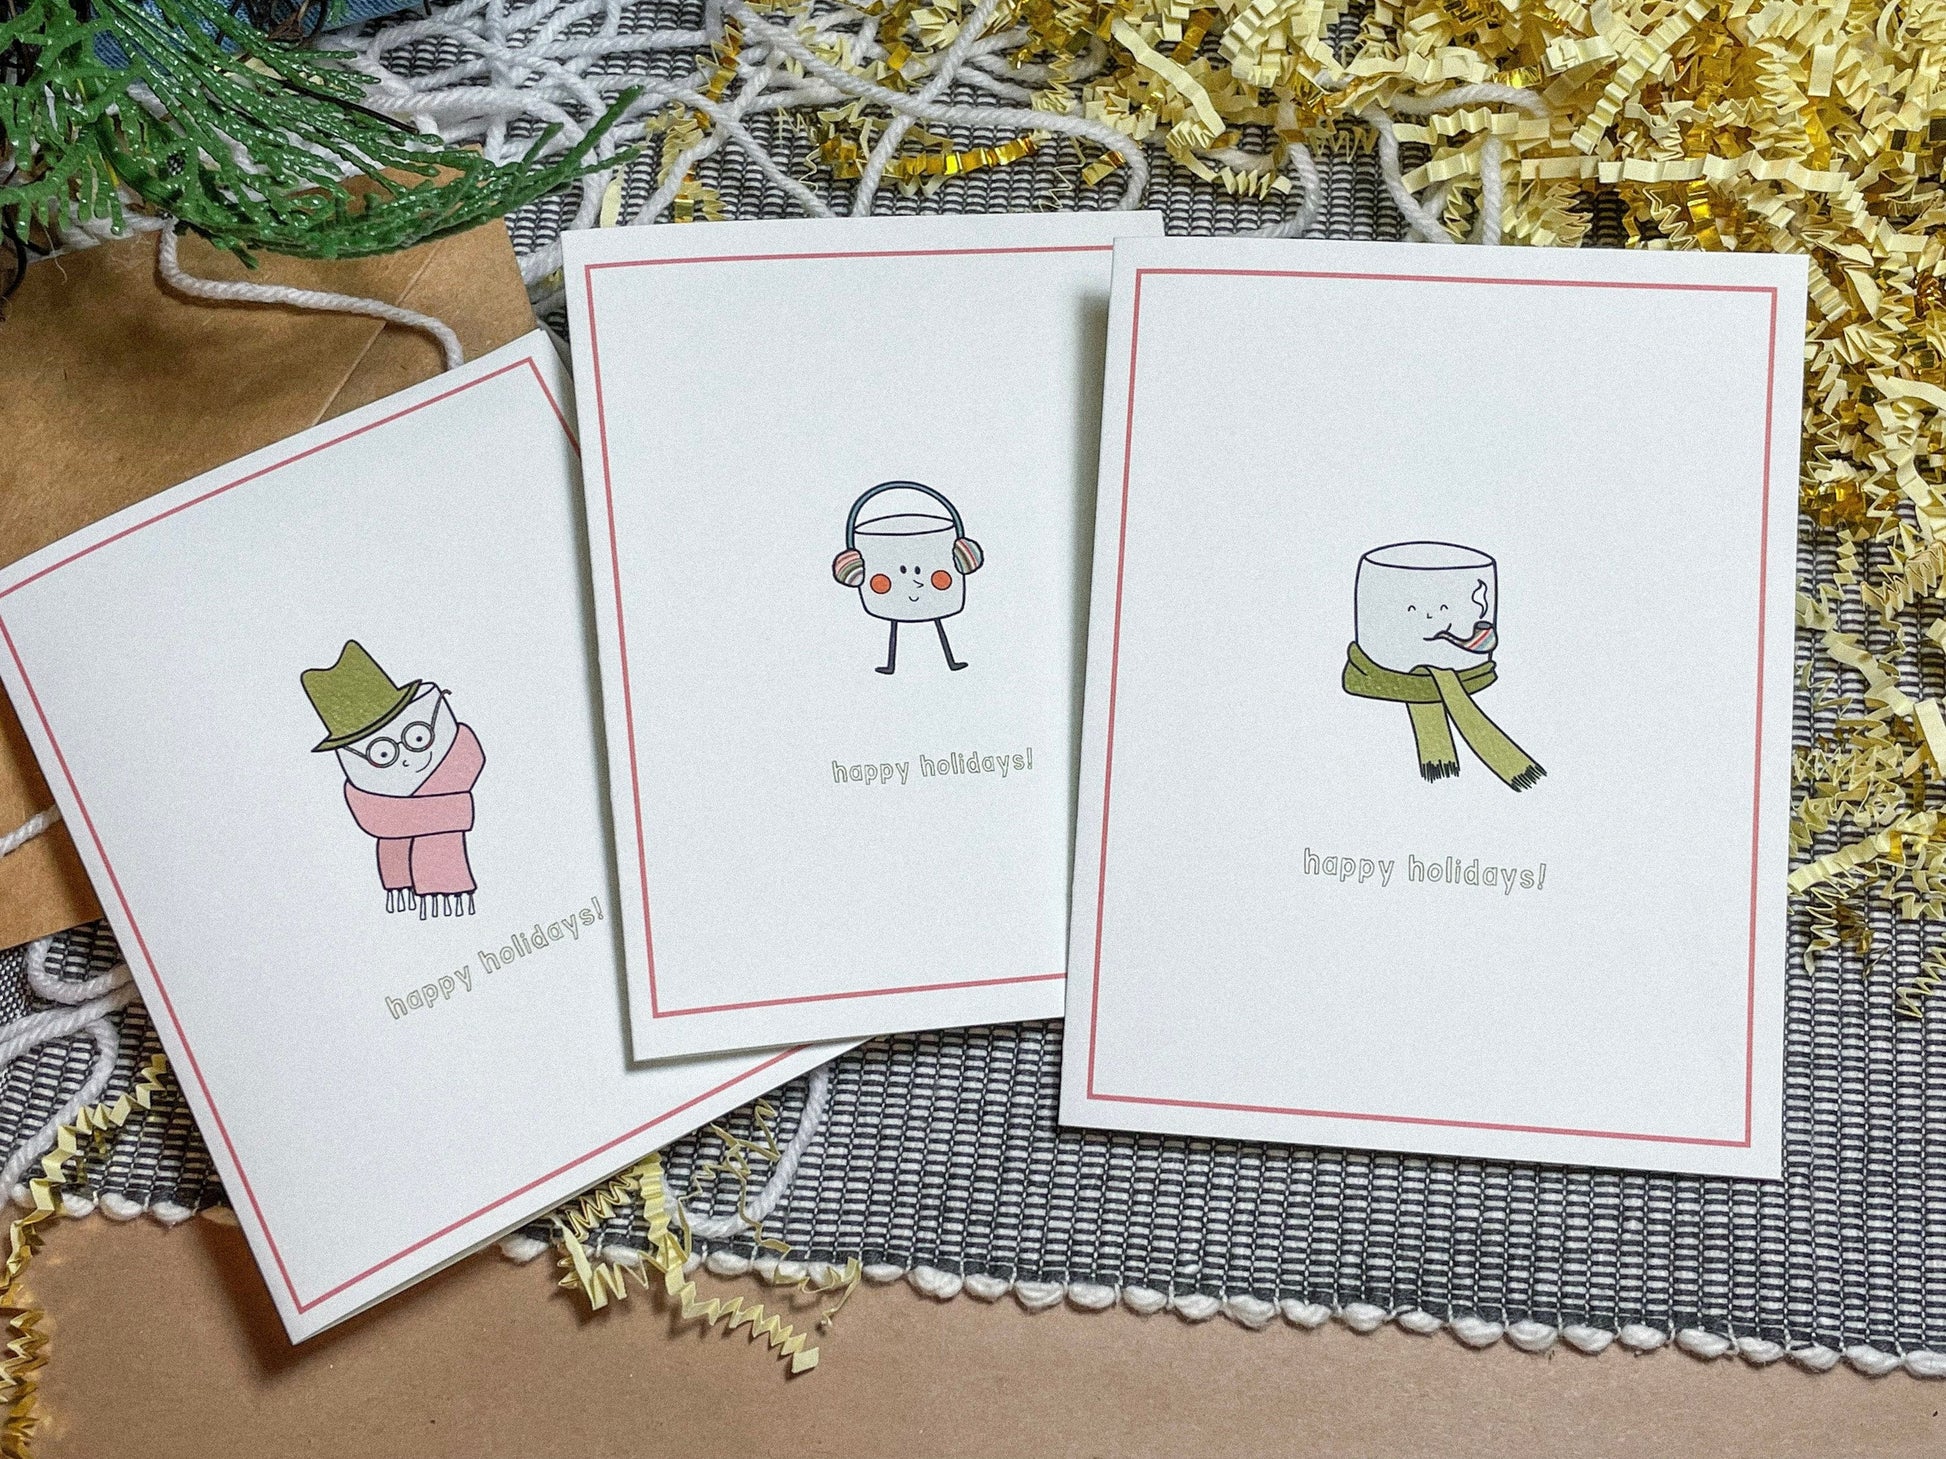 This holiday card features a drawing of a cute little marshmallow man with a scarf and a top hat with the text 'happy holidays!" Here you can see all 3 of the marshmallow cards - one with a hat and a scarf, one with little earmuffs, and one with a scarf and a pipe